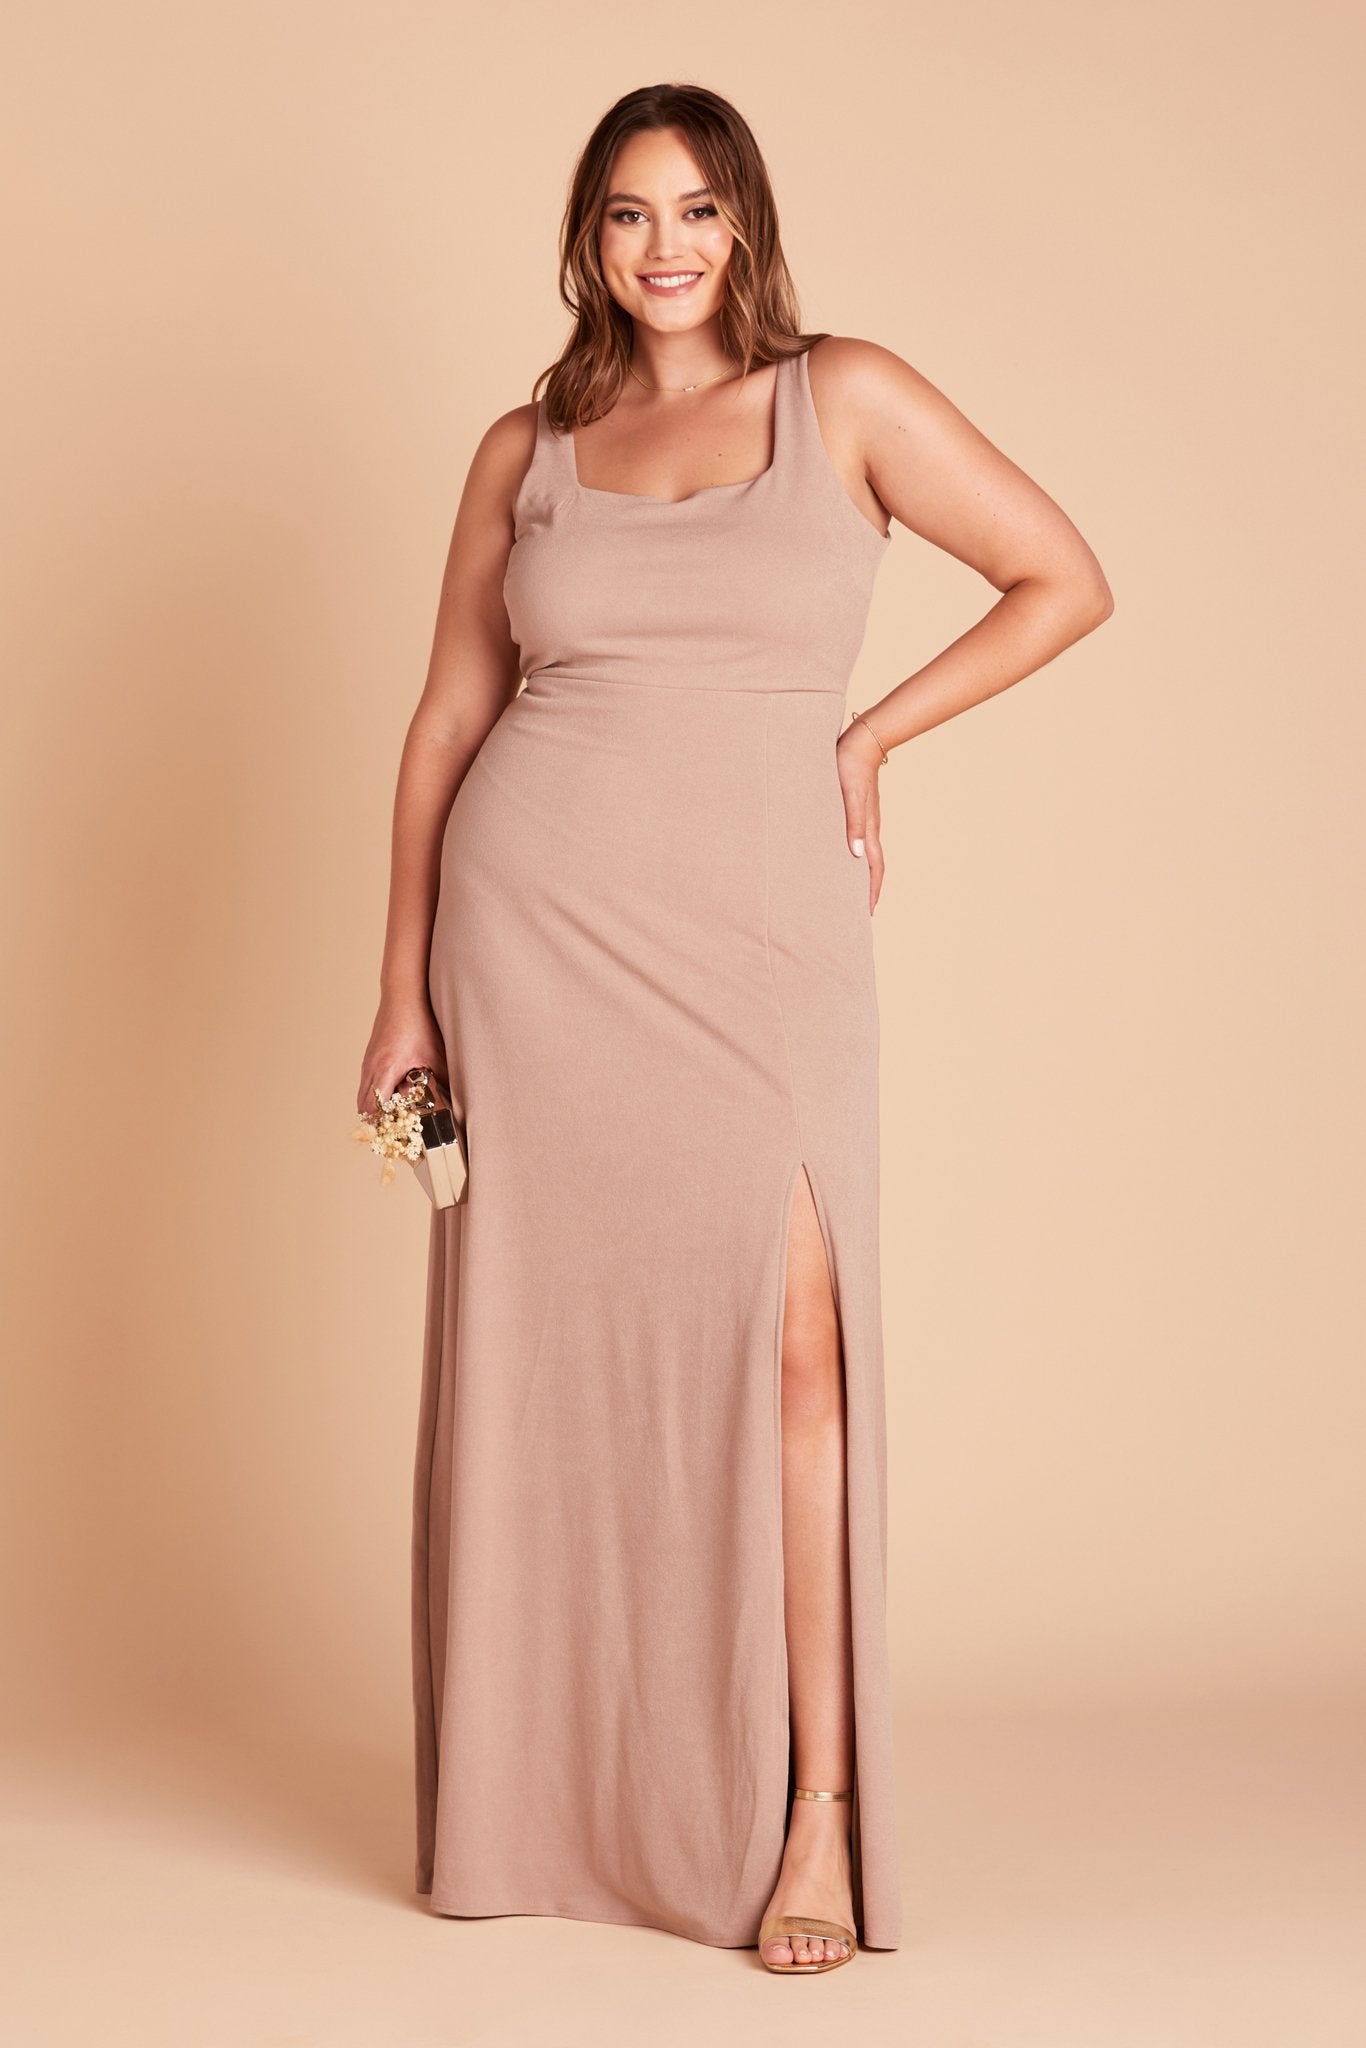 Front view of the Alex Convertible Plus Size Bridesmaid Dress in taupe crepe without shoulder ties worn by a model who is curvy with a medium skin tone.